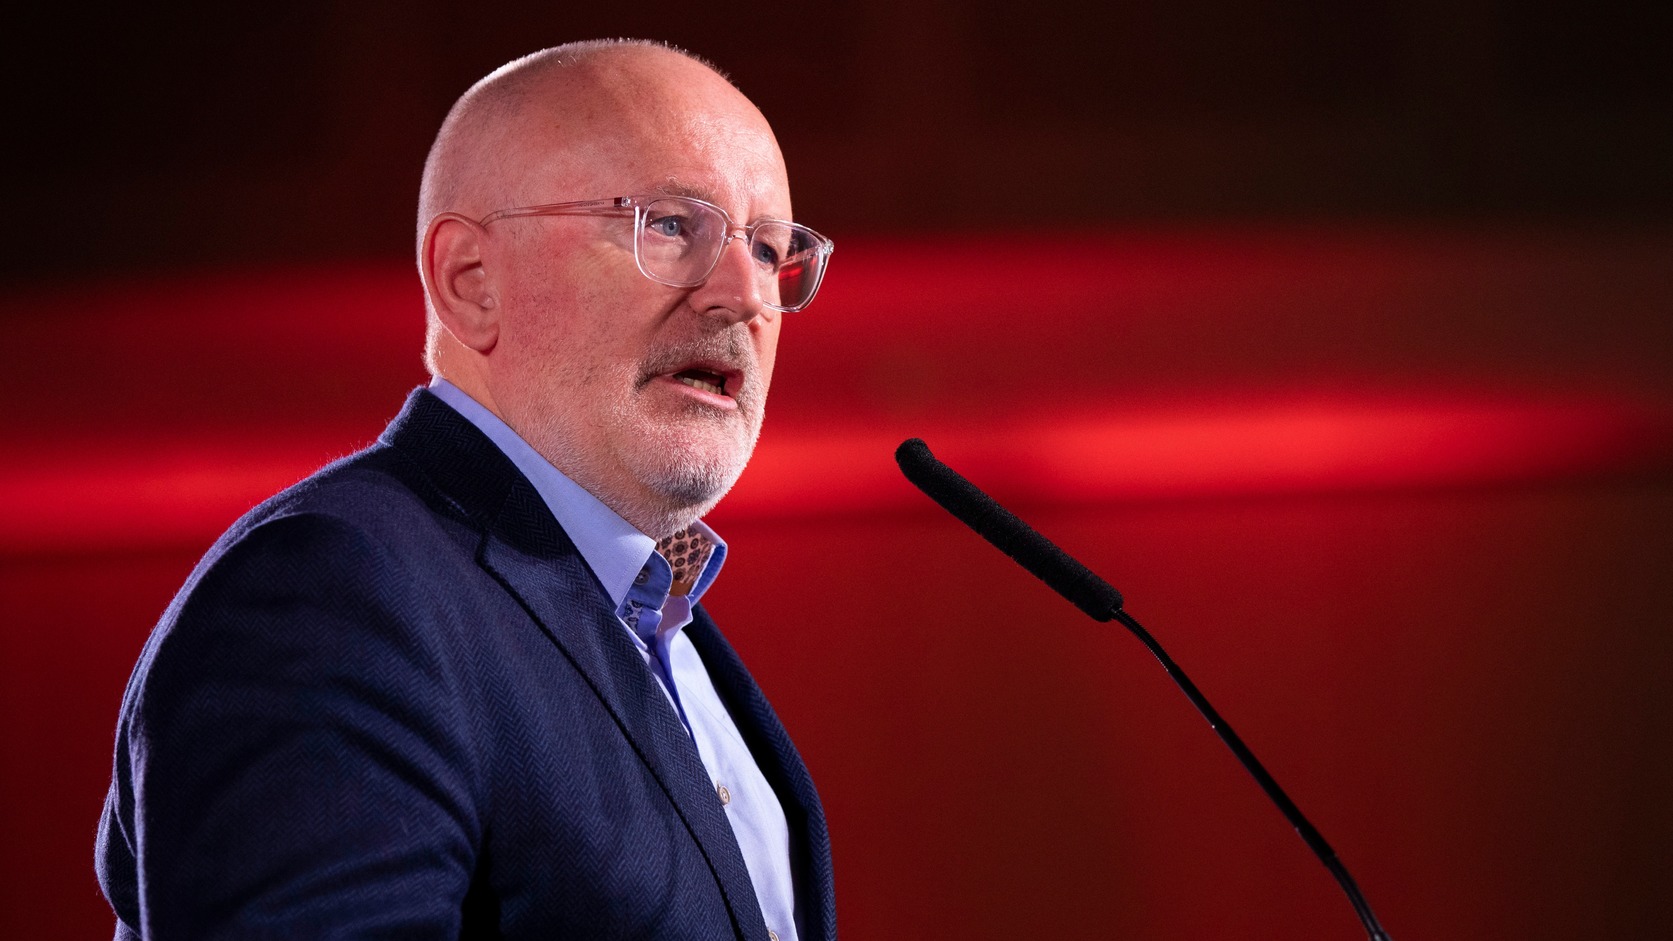 'Shame on science' - Dutch engineers respond to Frans Timmermans' honorary doctorate